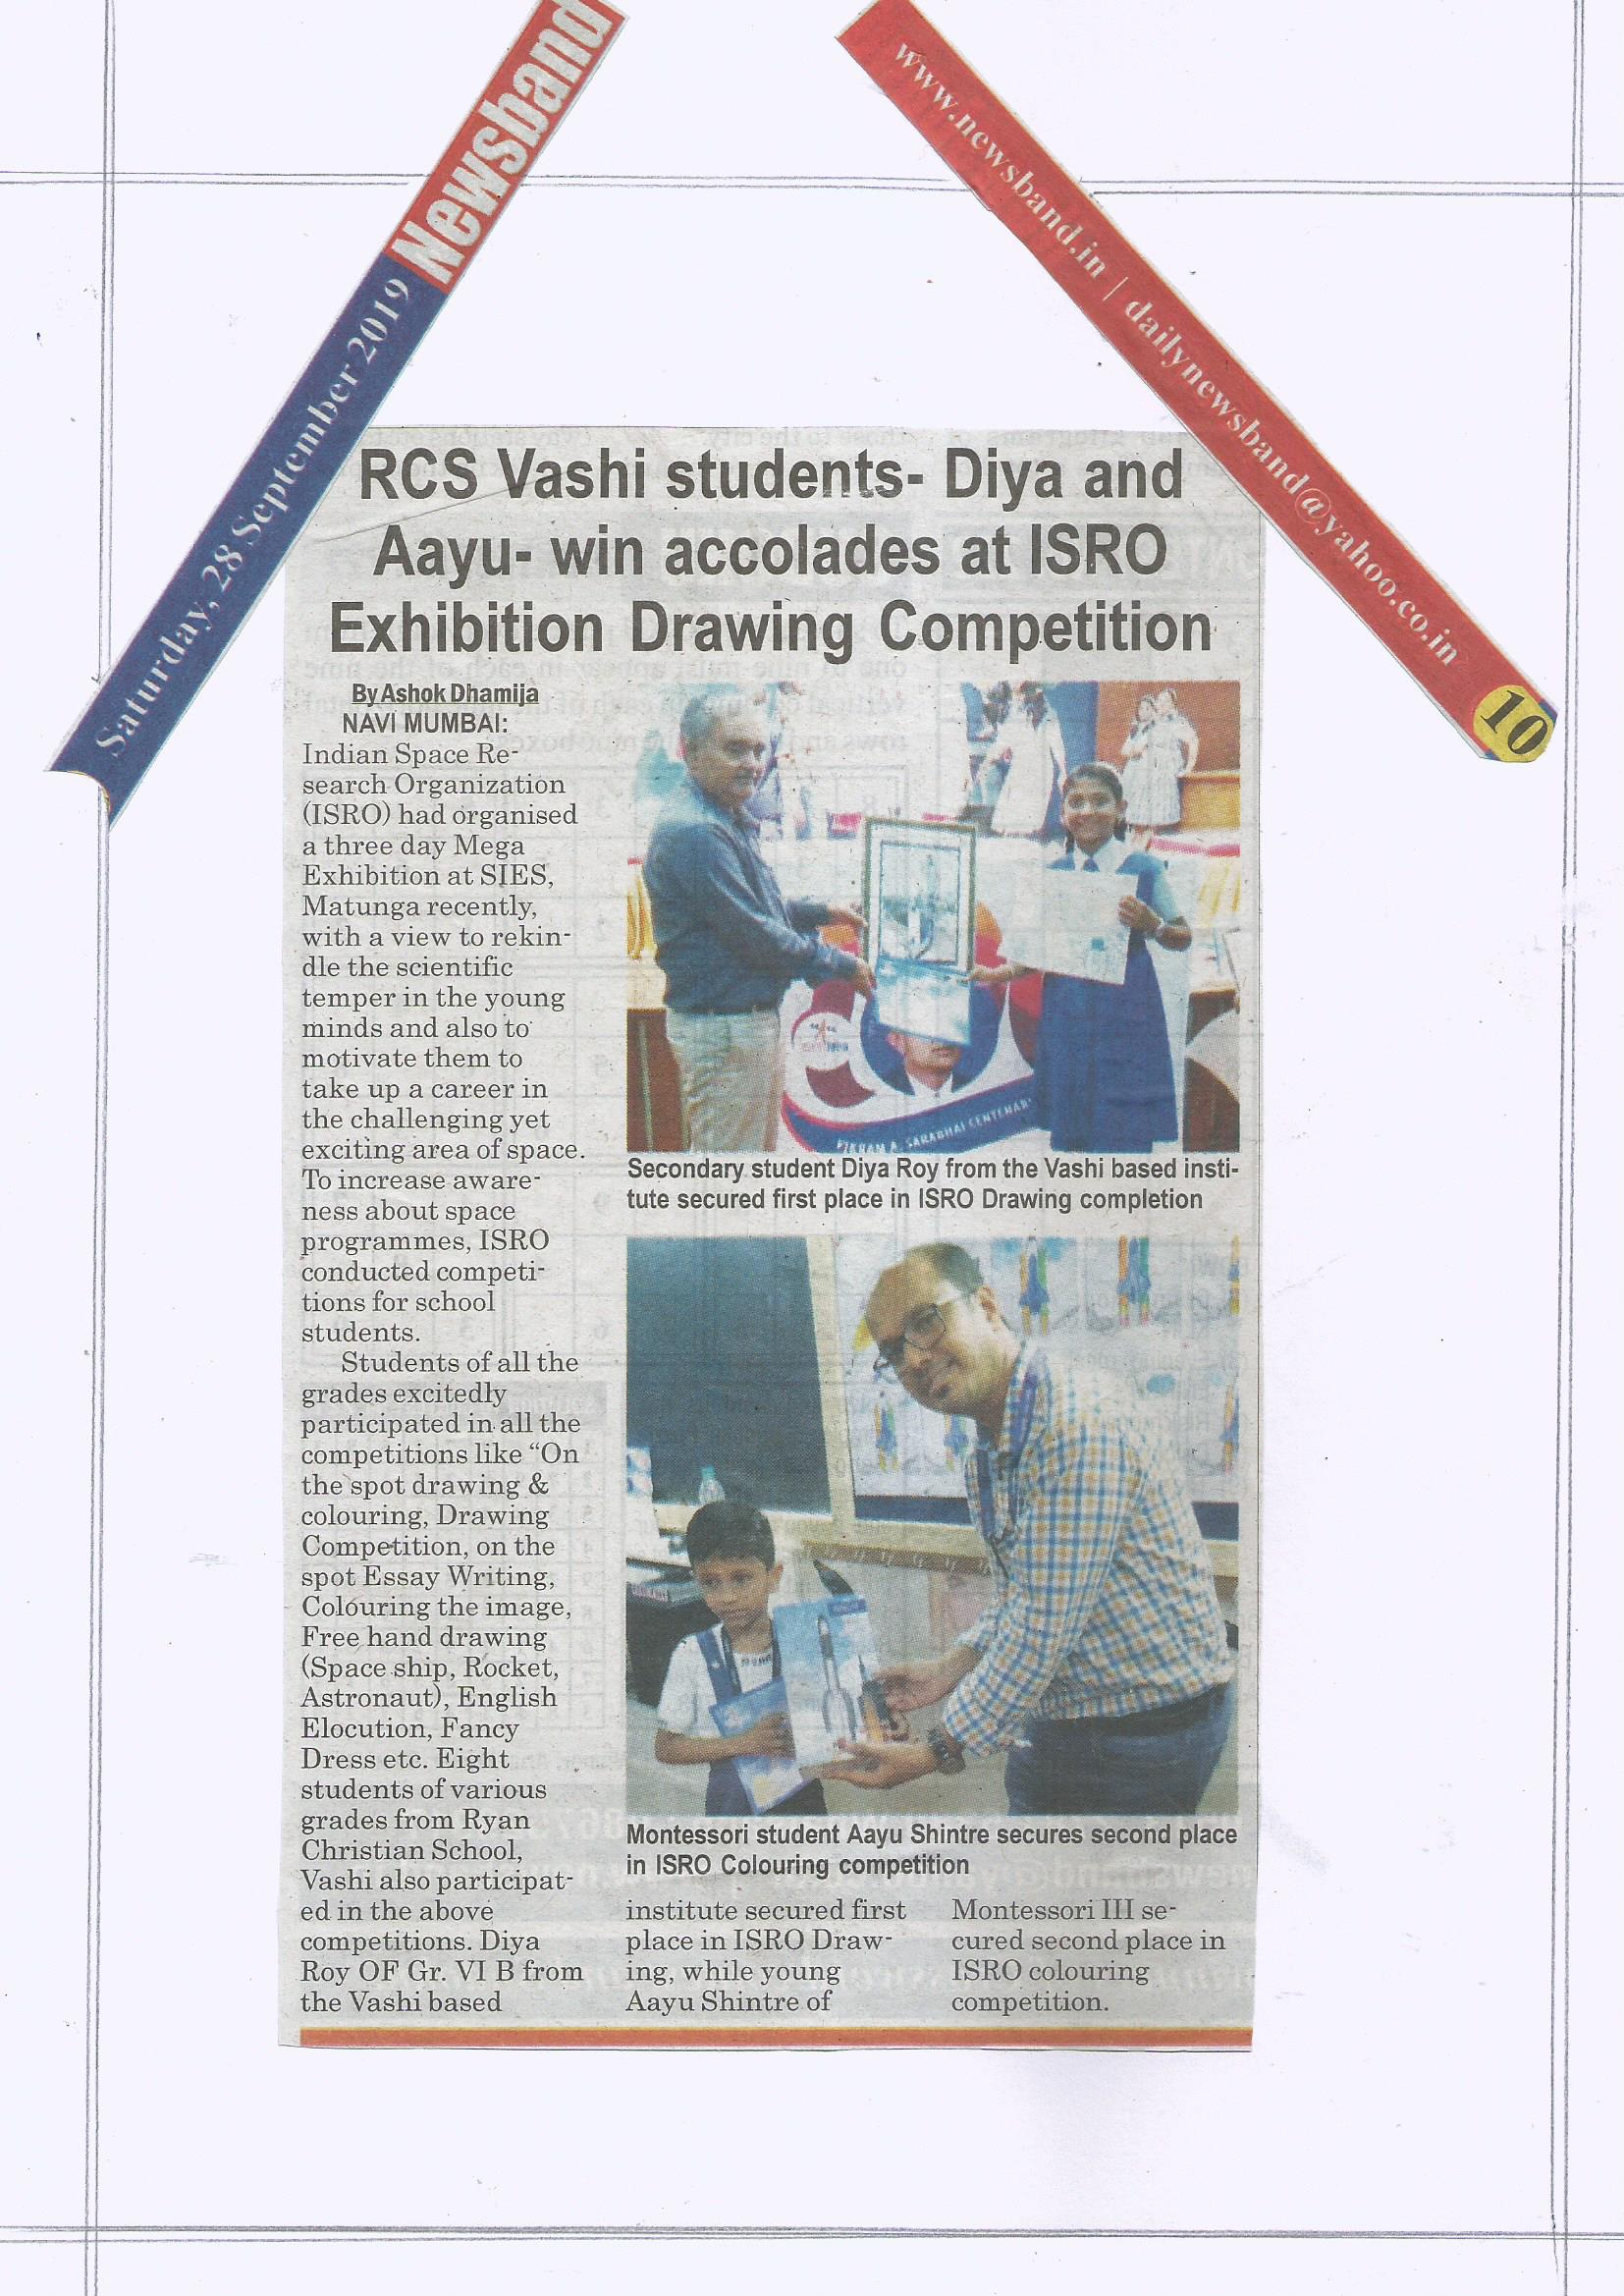 ISRO Exhibition was featured in Newsband